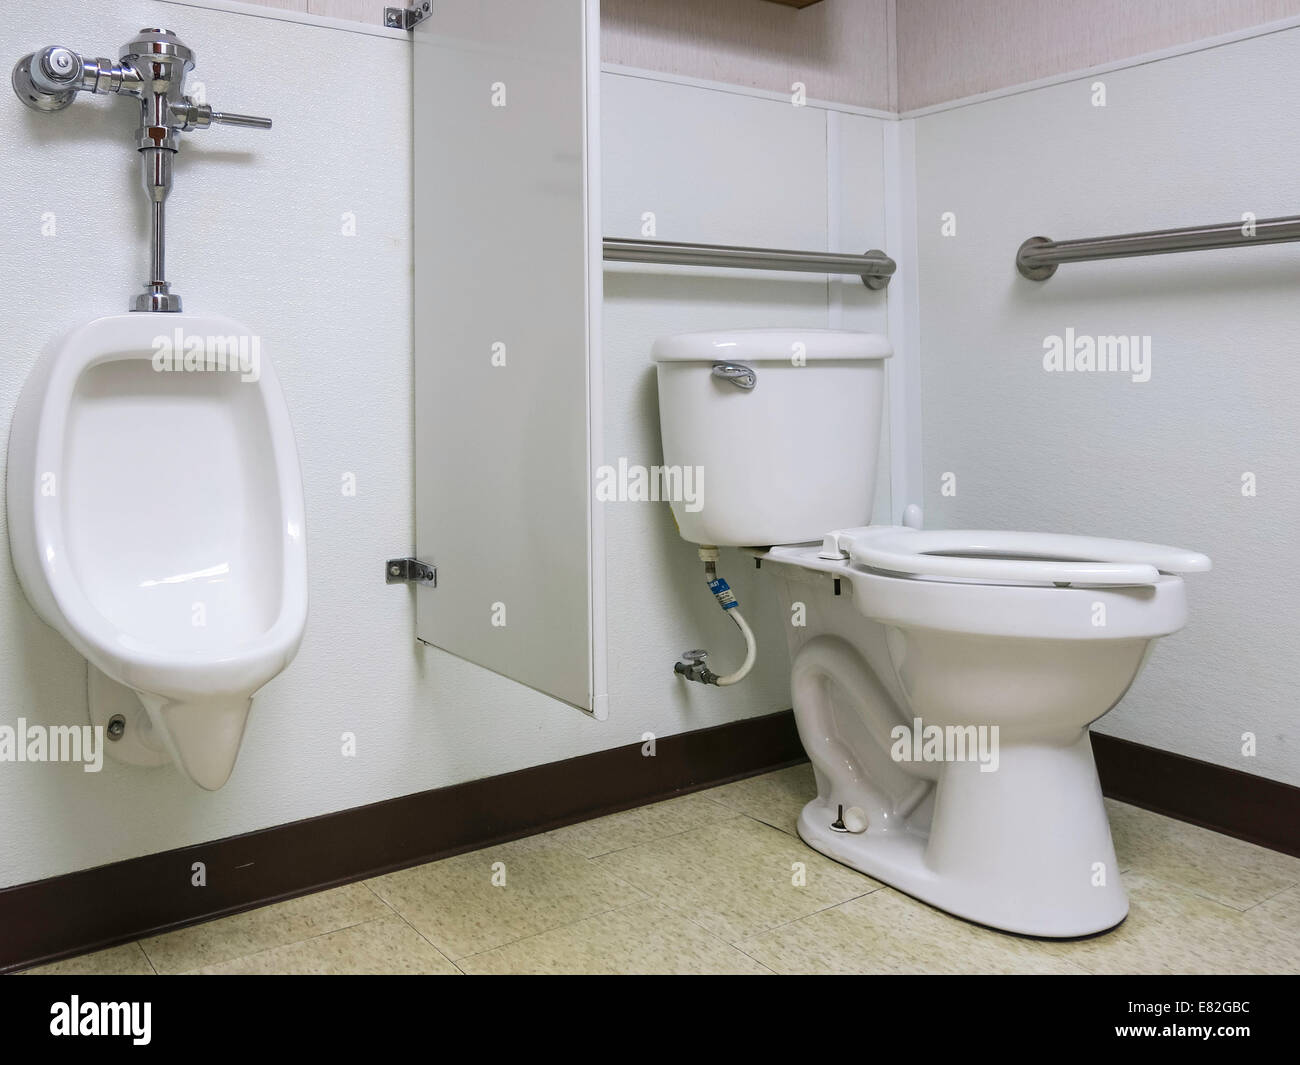 Unisex and Wheelchair Accessible Public Restroom. USA Stock Photo